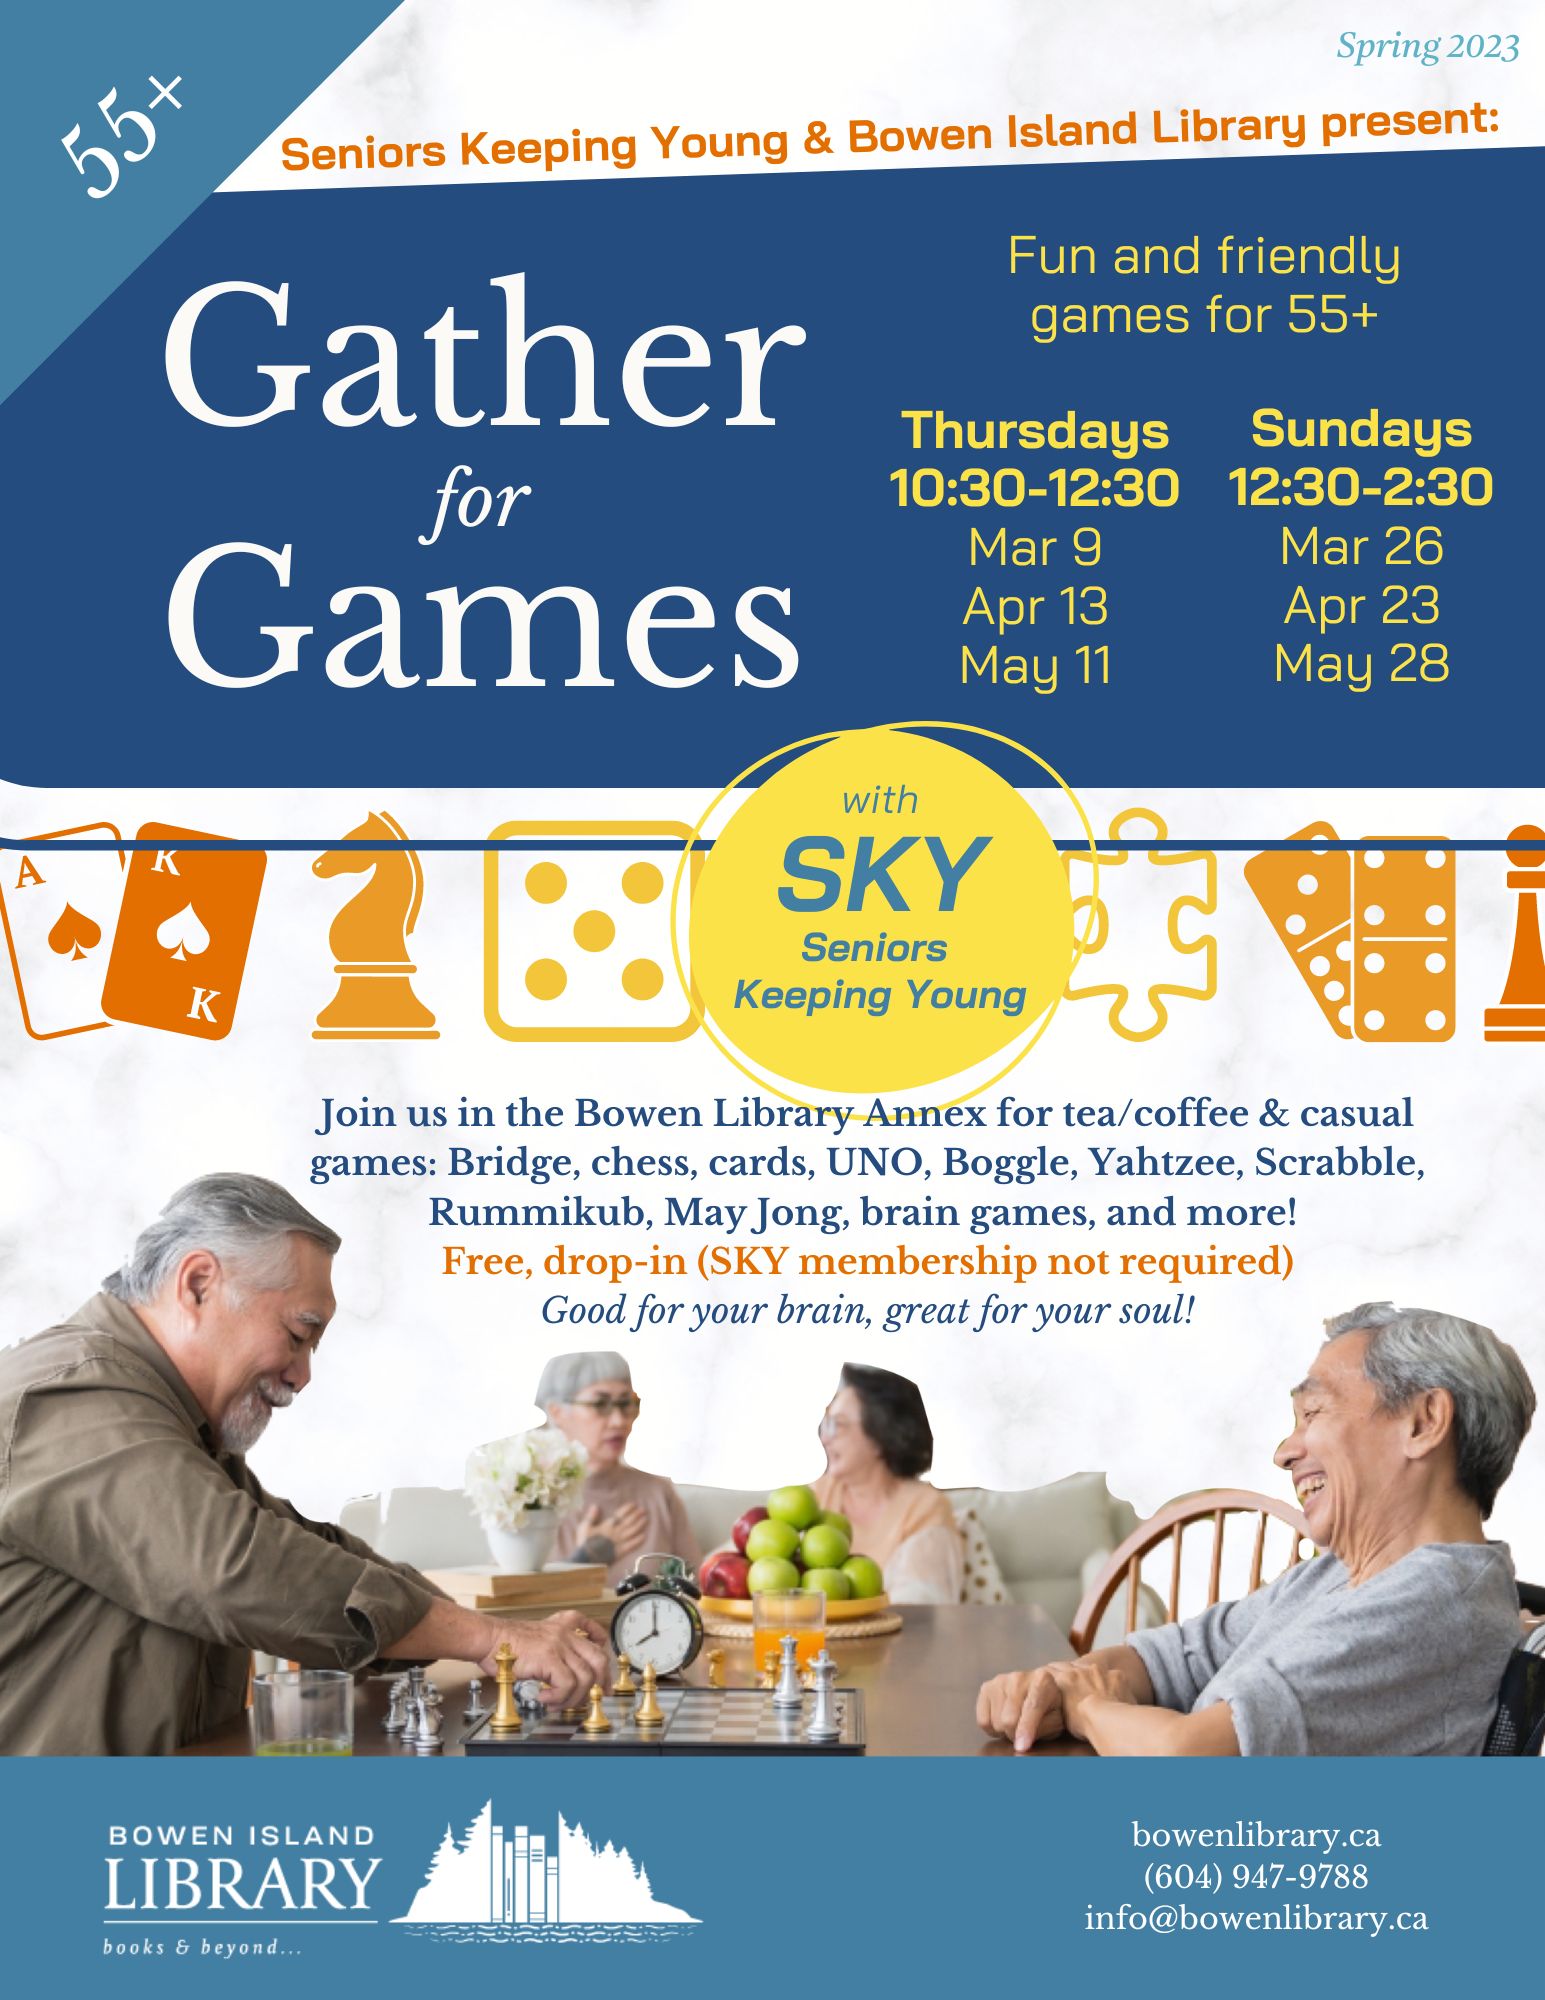 Image description: blue, yellow, and orange poster with a photo of a group of four seniors playing chess and socializing.